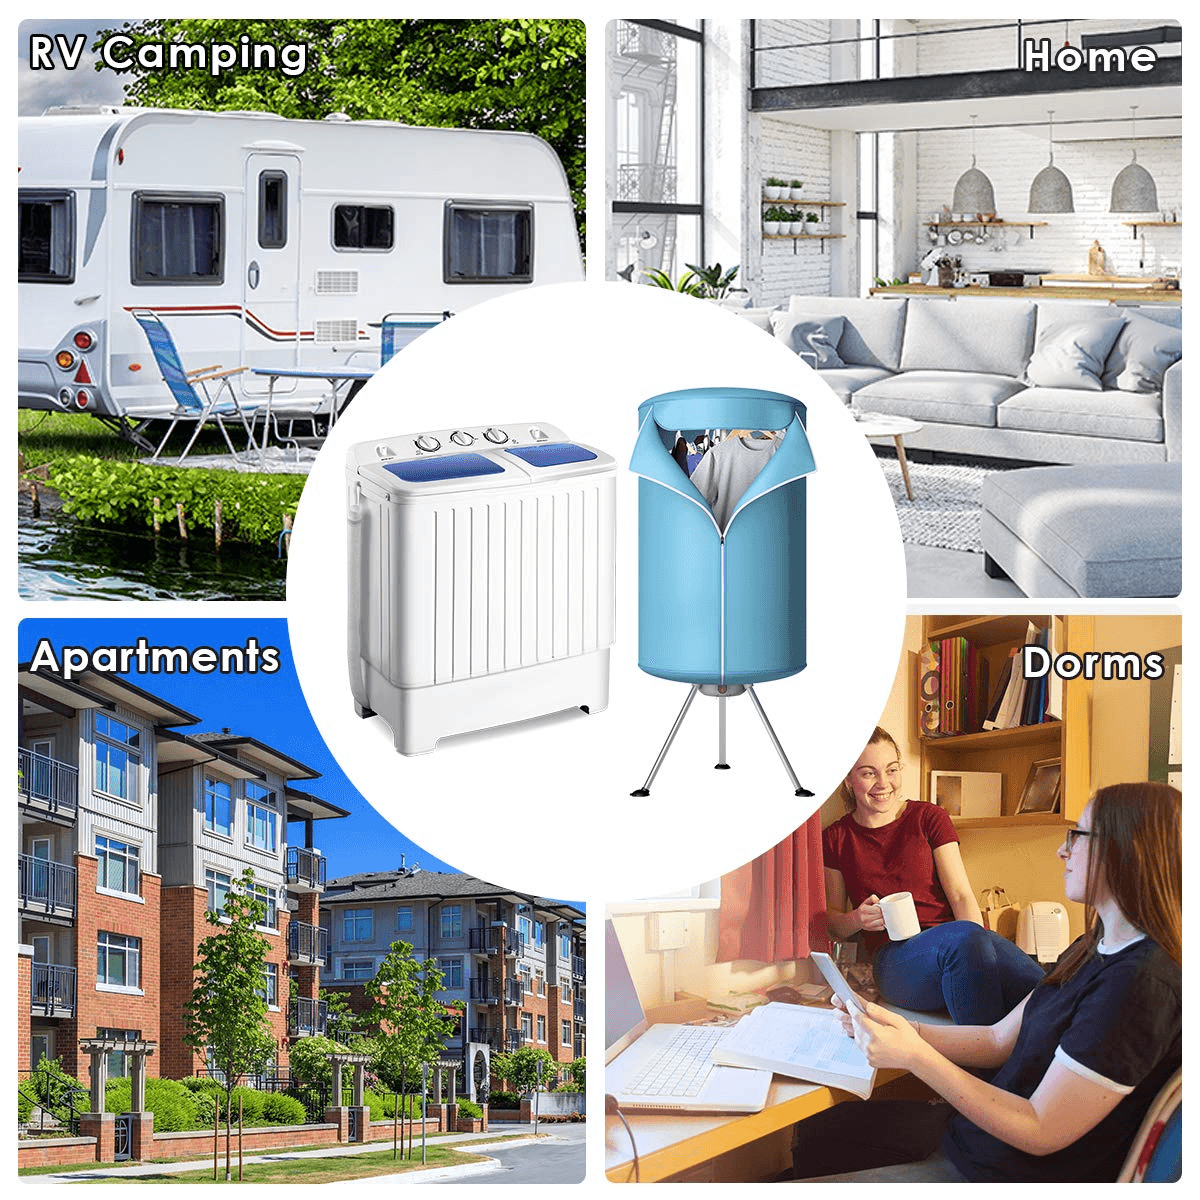 17.6lbs Portable Washing Machine 900W with Electric Heating Clothes Dryer Ventless Laundry Dryer and Heater for Home and Apartment - Giantexus